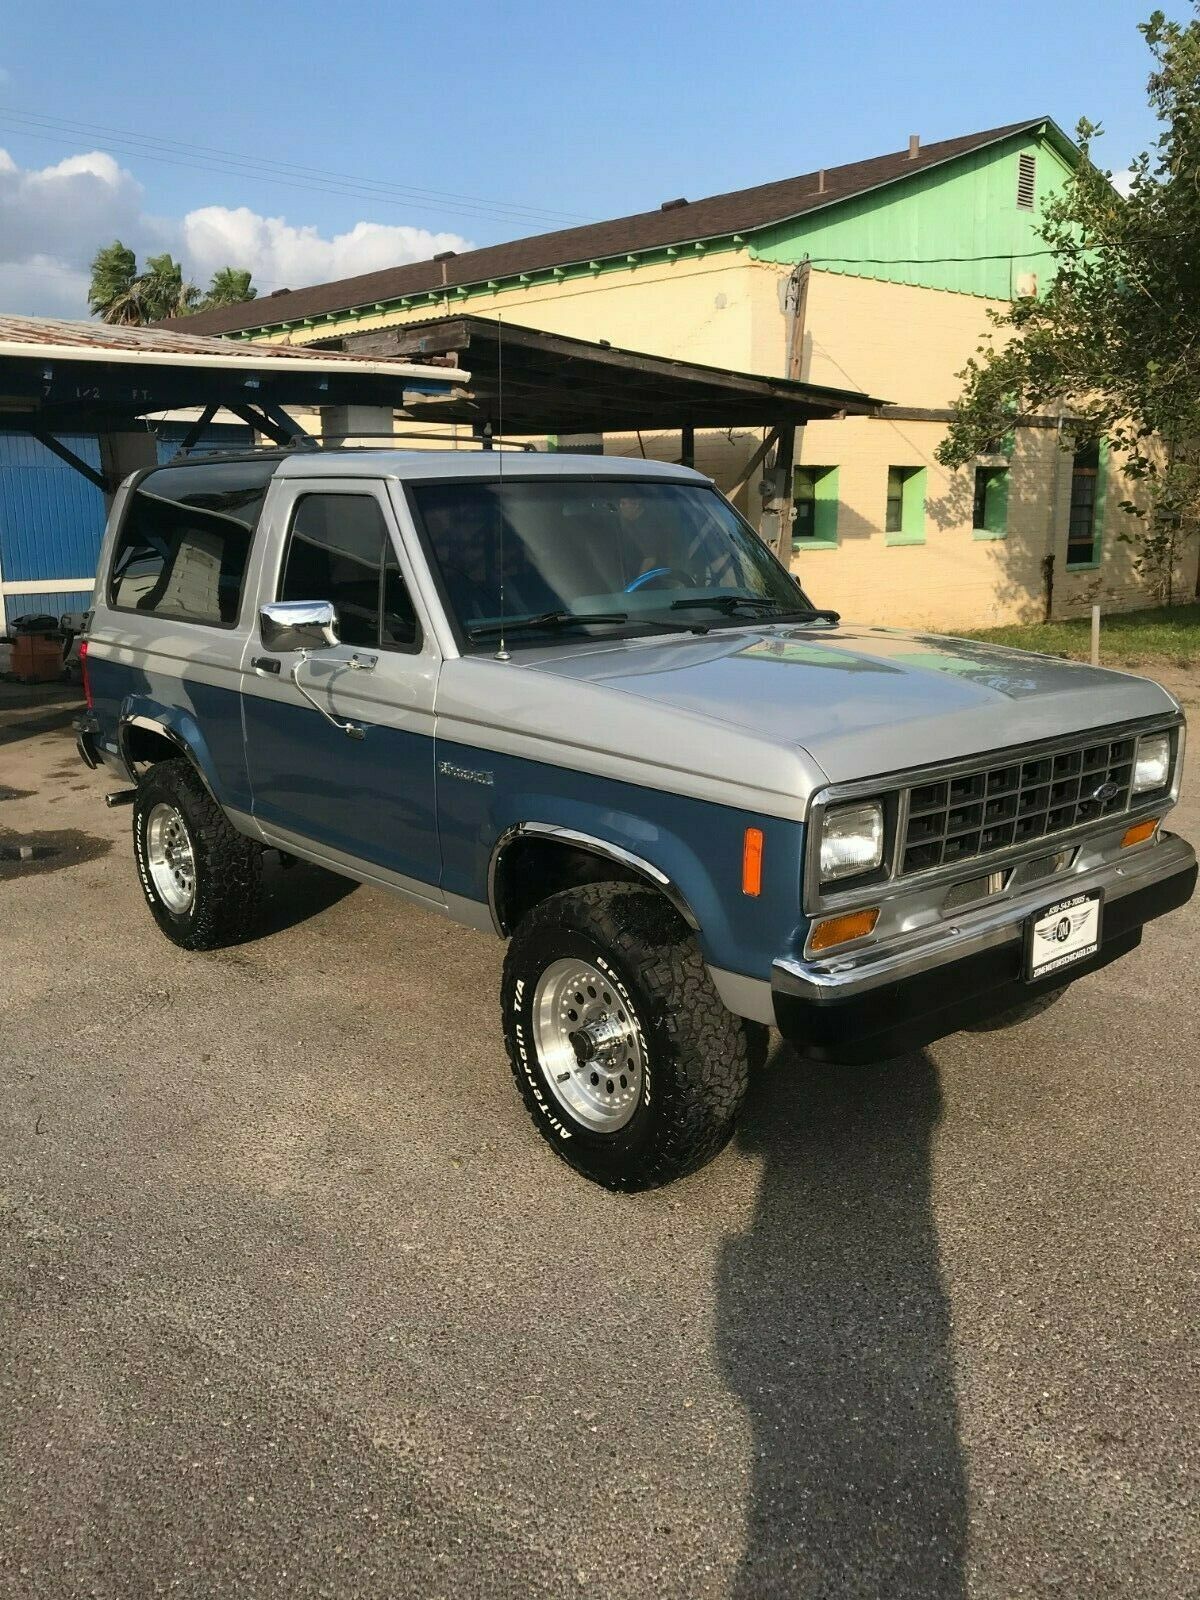 1988 Ford Bronco Ii In Mint Condition For Sale Other Makes 1988 For